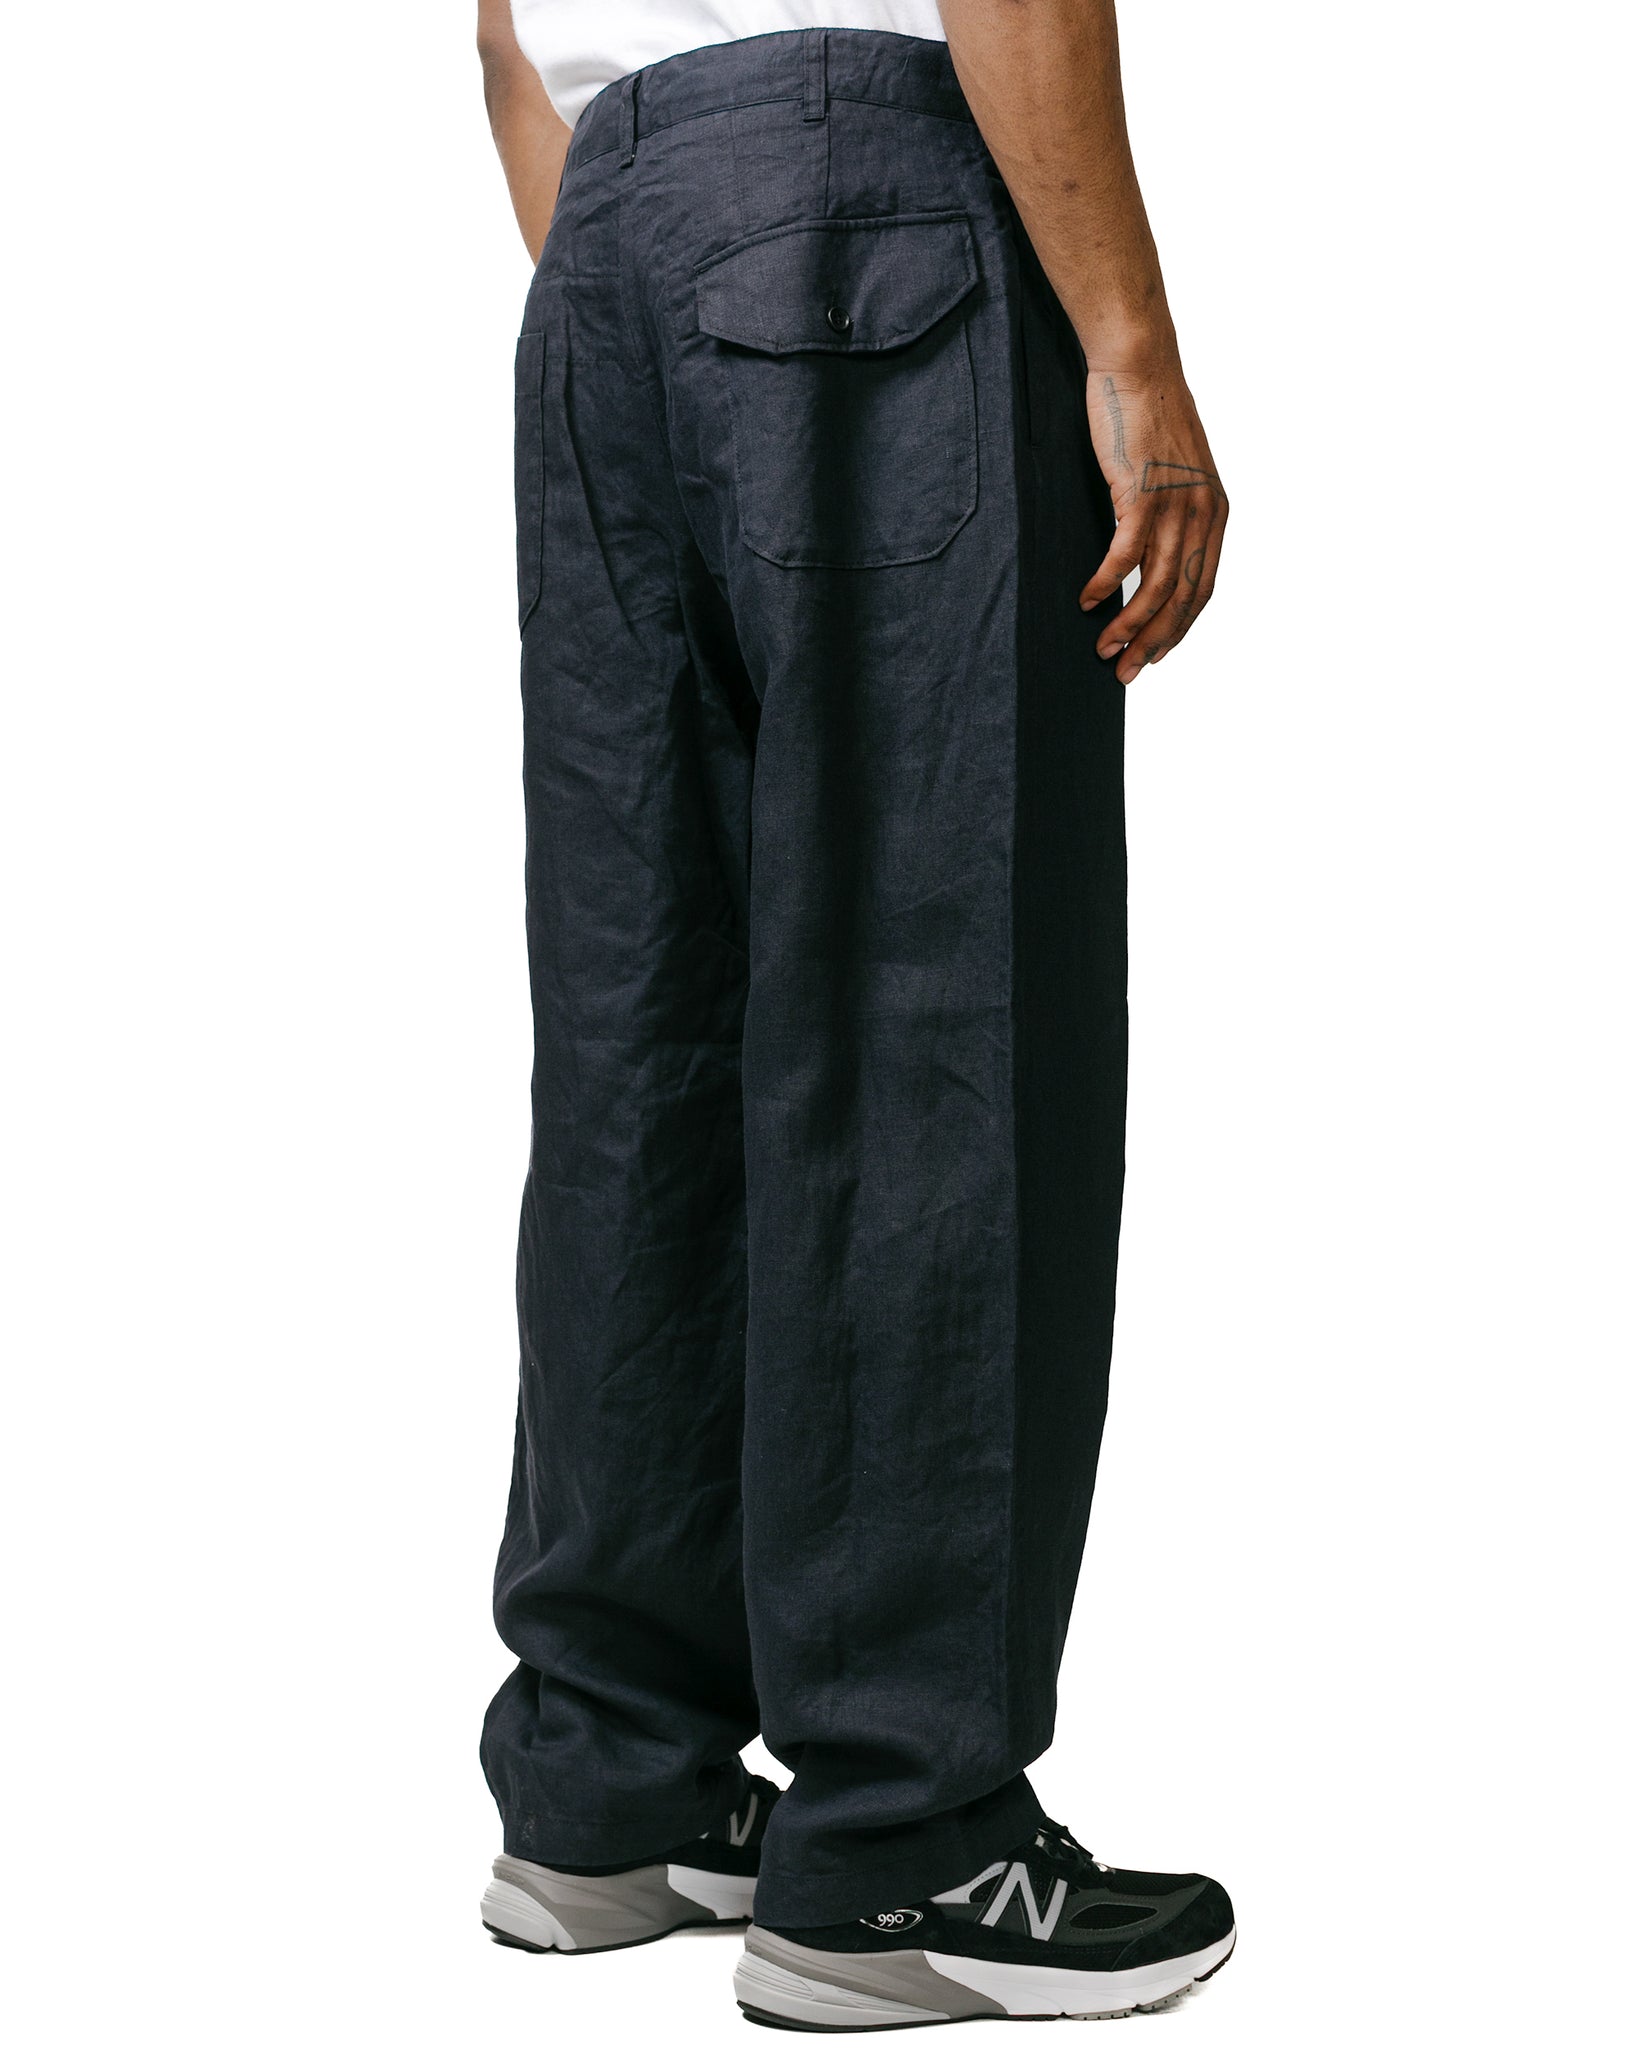 Engineered Garments Carlyle Pant Navy Linen Twill model back